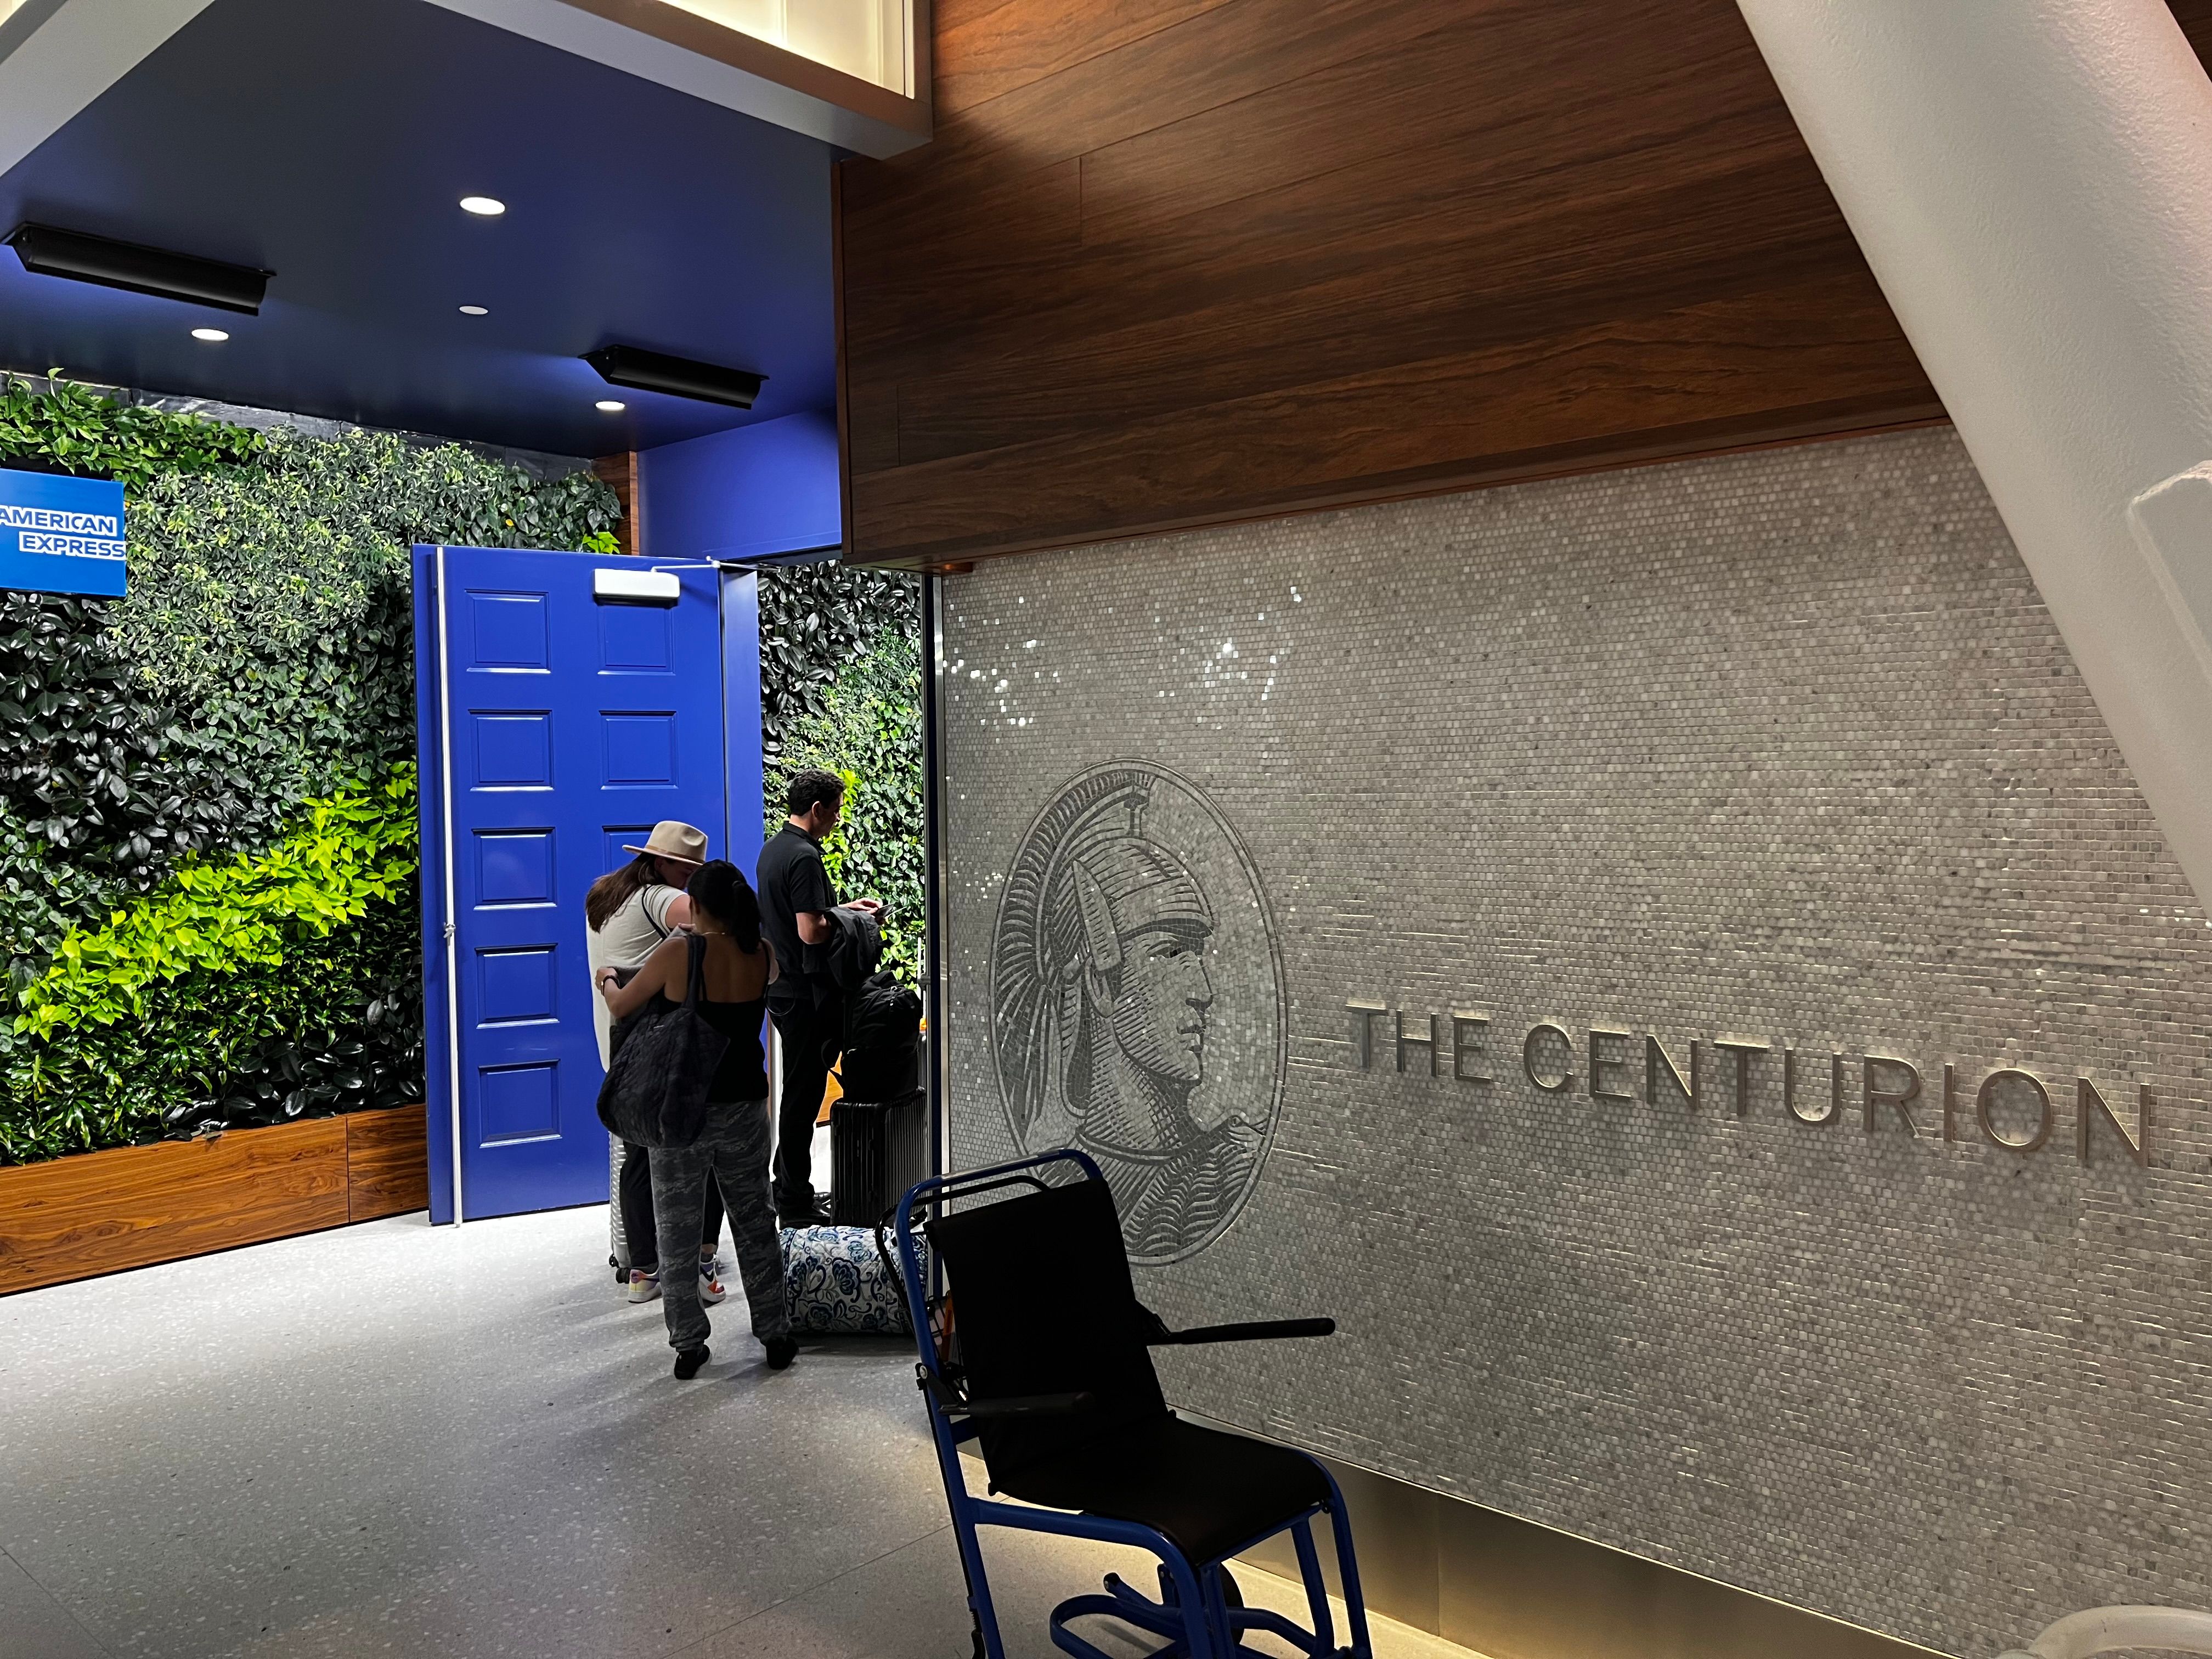 Just outside the entrance to the American Express Centurion Lounge at JFK airport's Terminal 4.